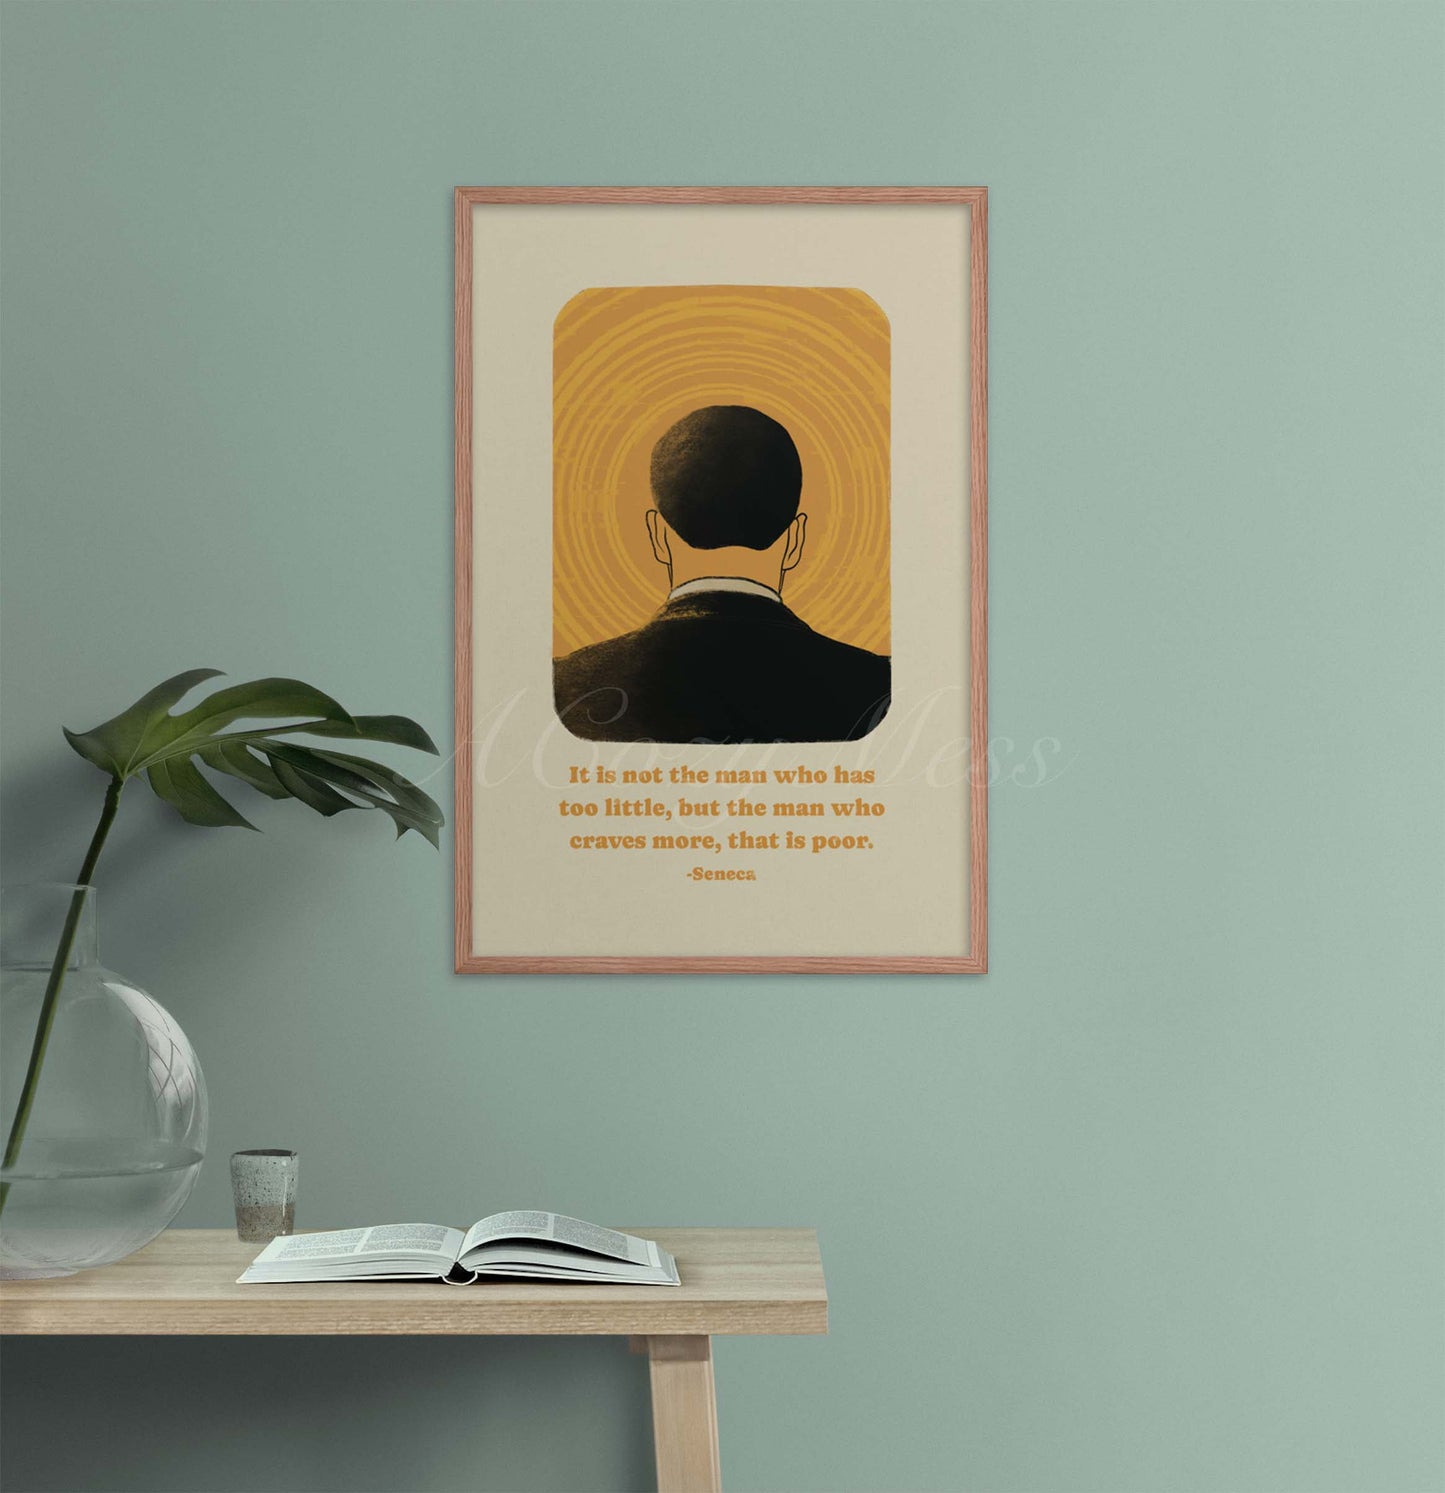 Art poster depicting the back of a man's head against a vibrant yellow background with concentric circles emanating from the center, resembling a halo or sun. Below the image is a quote by Seneca in elegant, readable font that reads, "It is not the man who has too little, but the man who craves more, that is poor." Available in Oak frame.